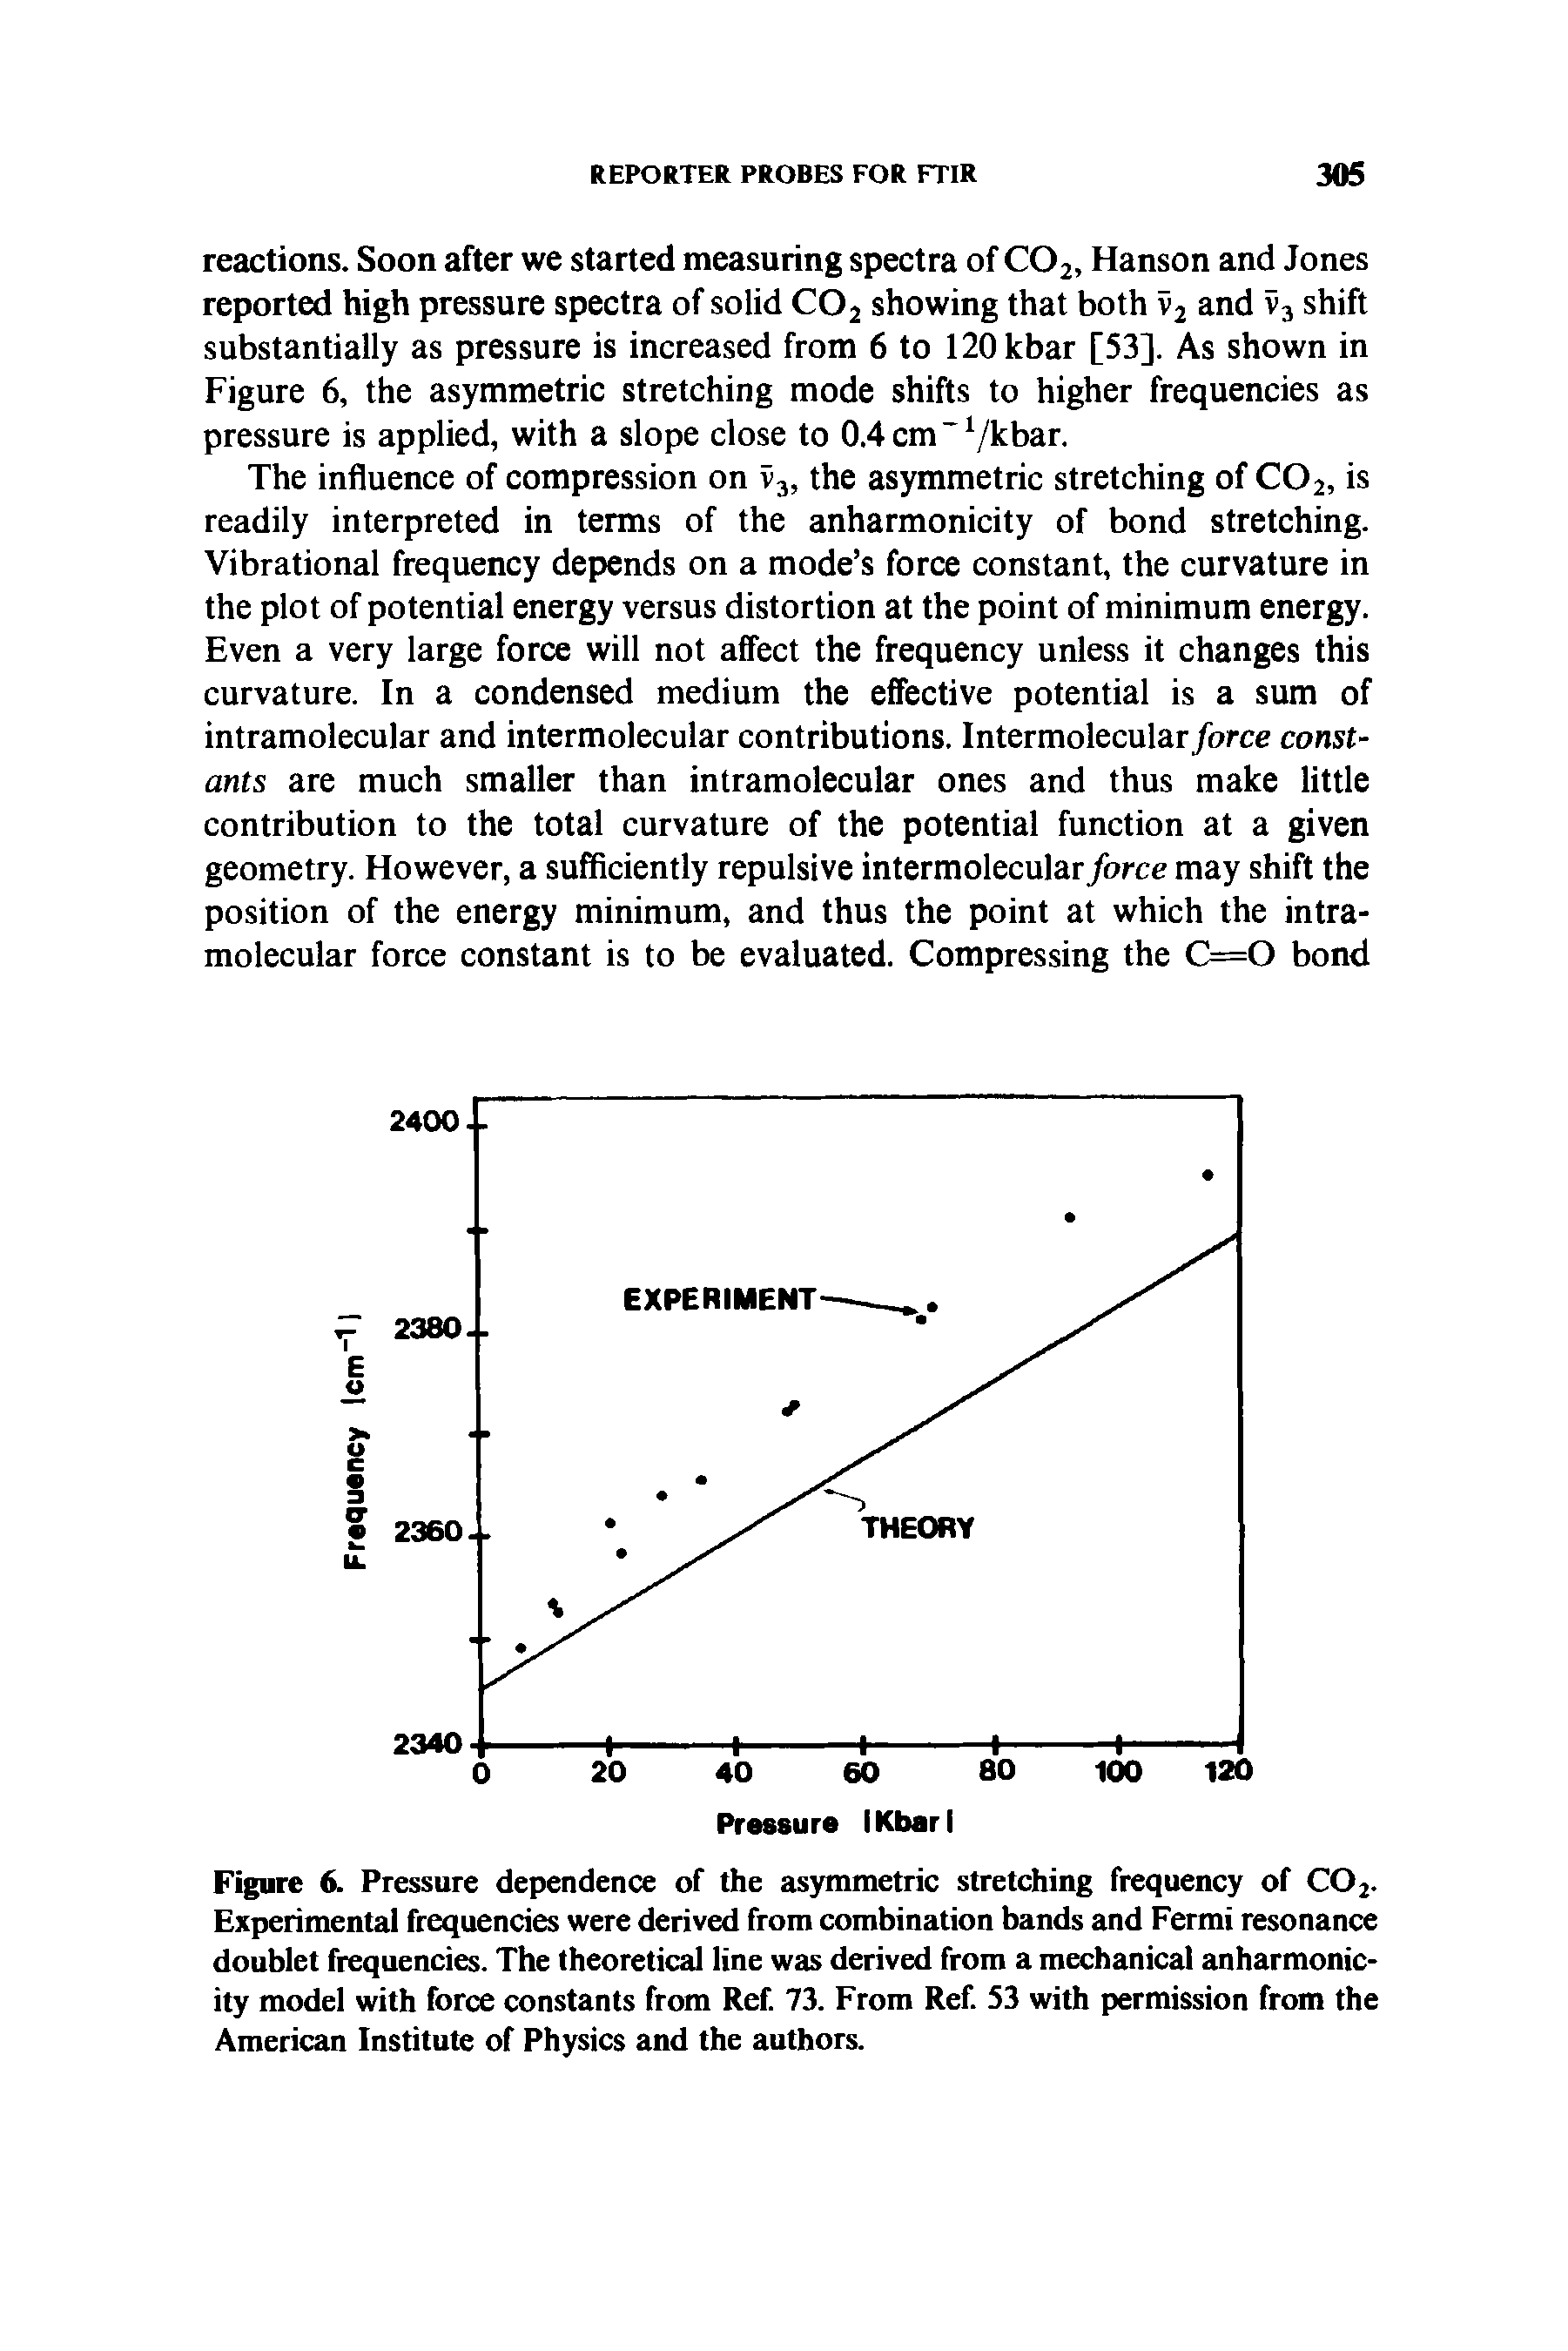 Figure 6. Pressure dependence of the asymmetric stretching frequency of C02. Experimental frequencies were derived from combination bands and Fermi resonance doublet frequencies. The theoretical line was derived from a mechanical anharmonicity model with force constants from Ref. 73. From Ref. 53 with permission from the American Institute of Physics and the authors.